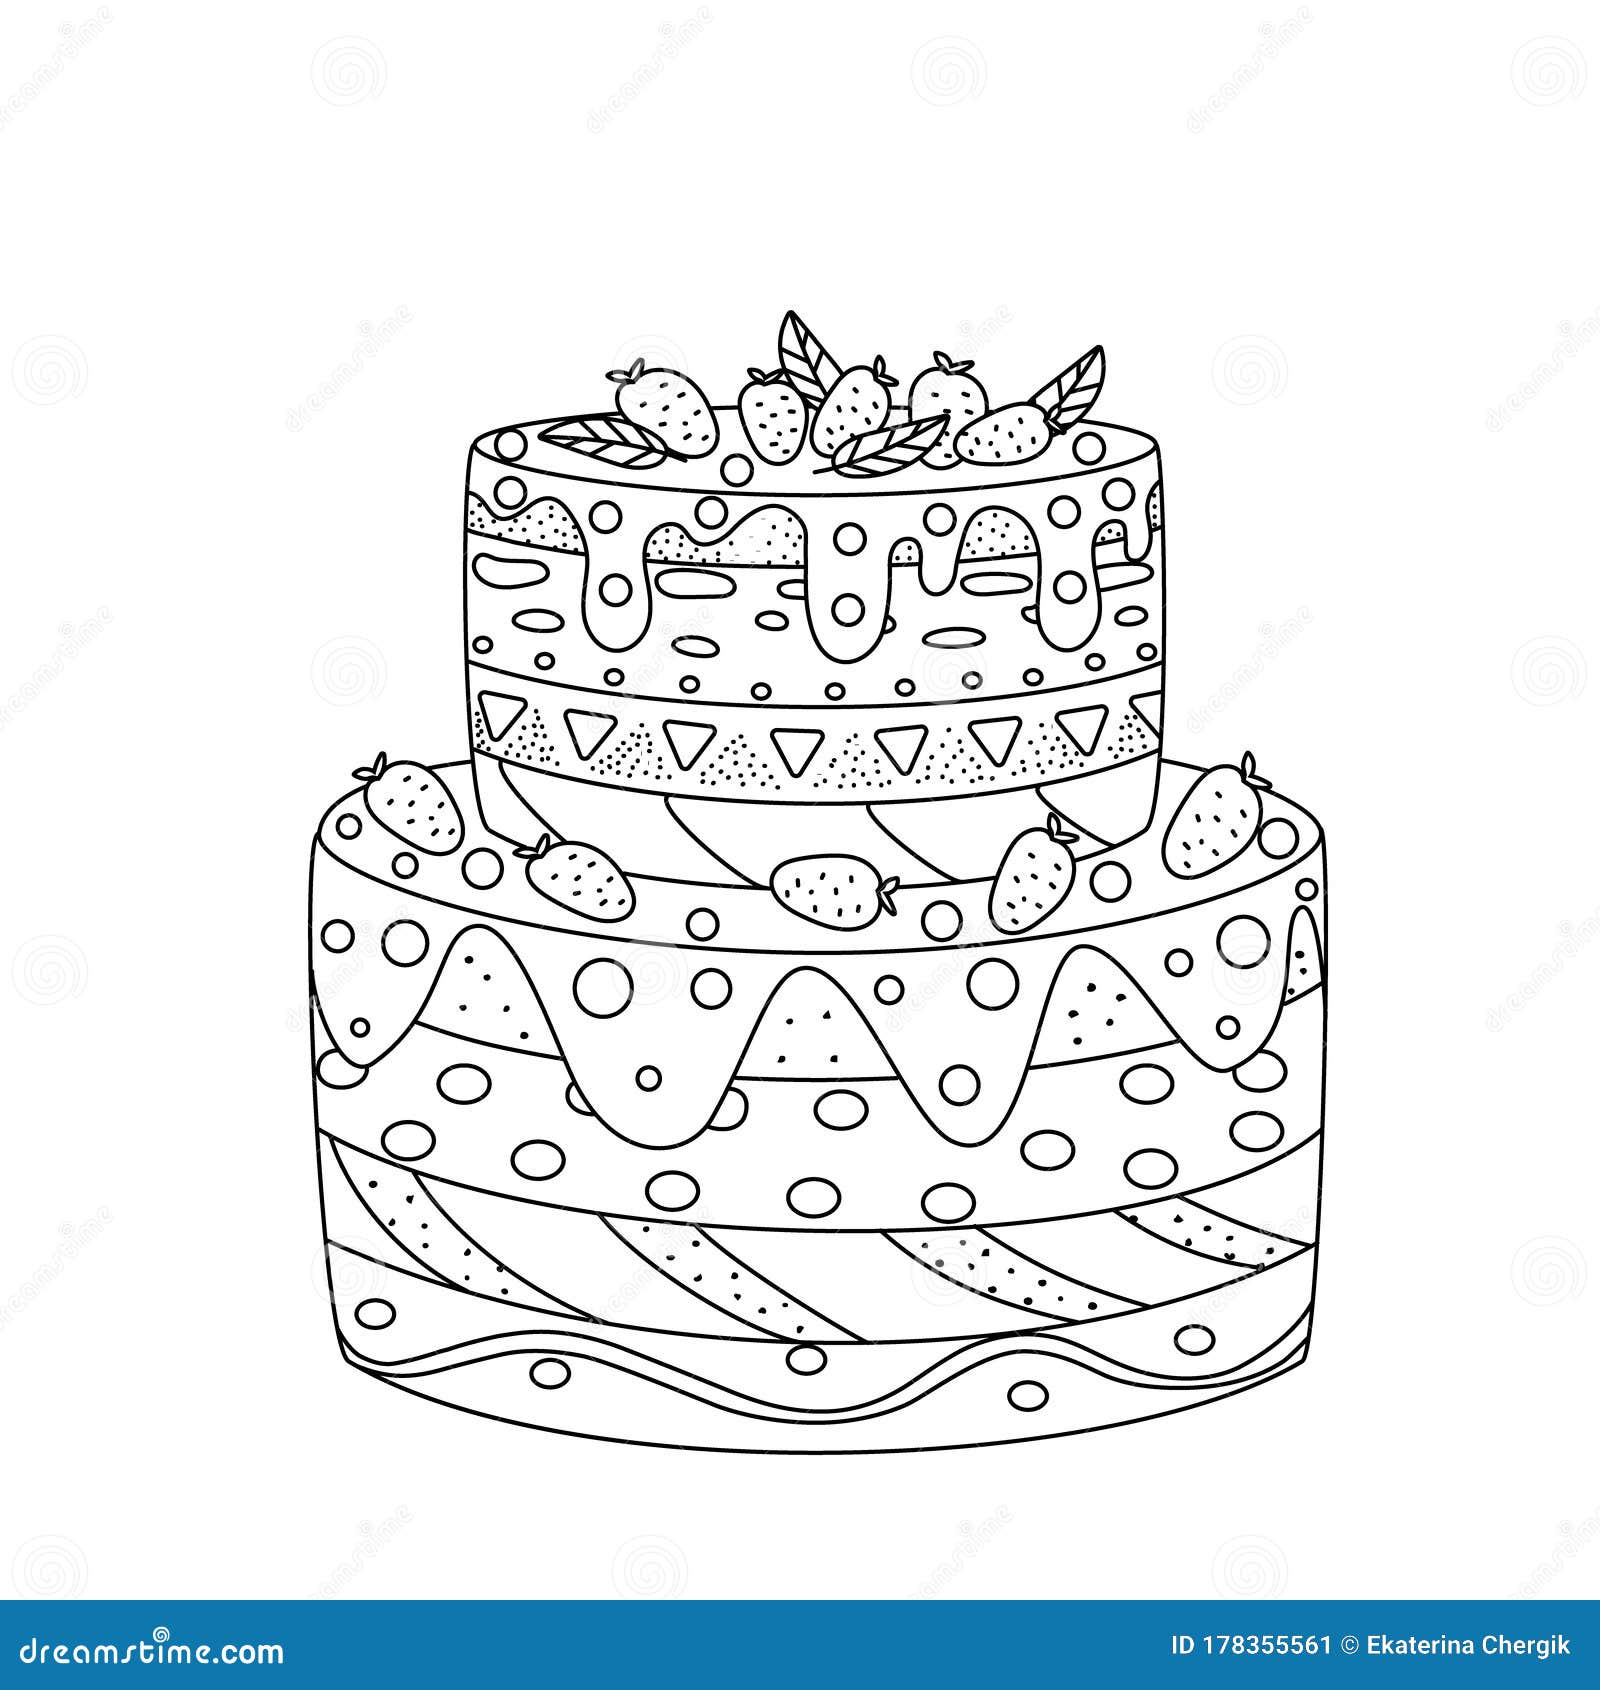 How To Draw A Cake  A Scrumptious 3 Layer Cake Drawing